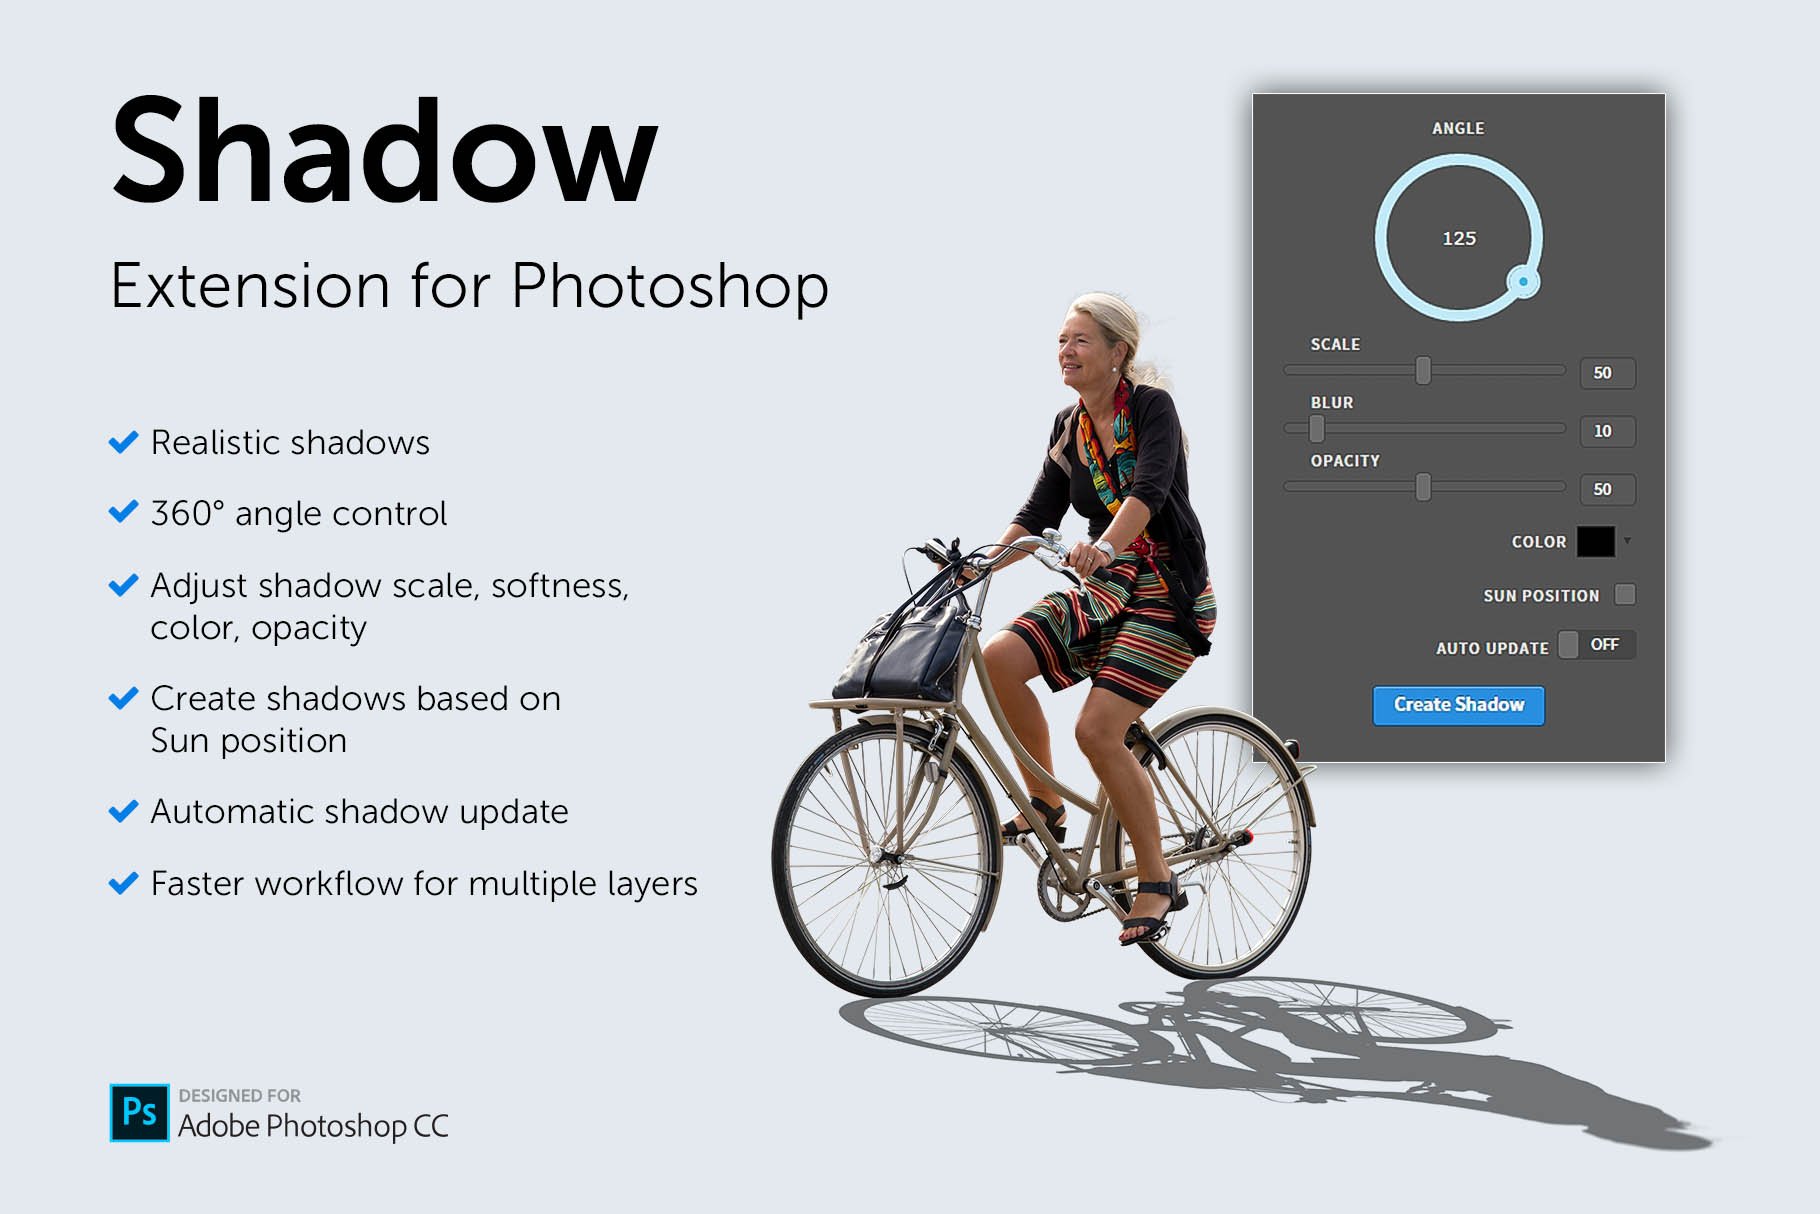 Shadow - Photoshop Extensioncover image.